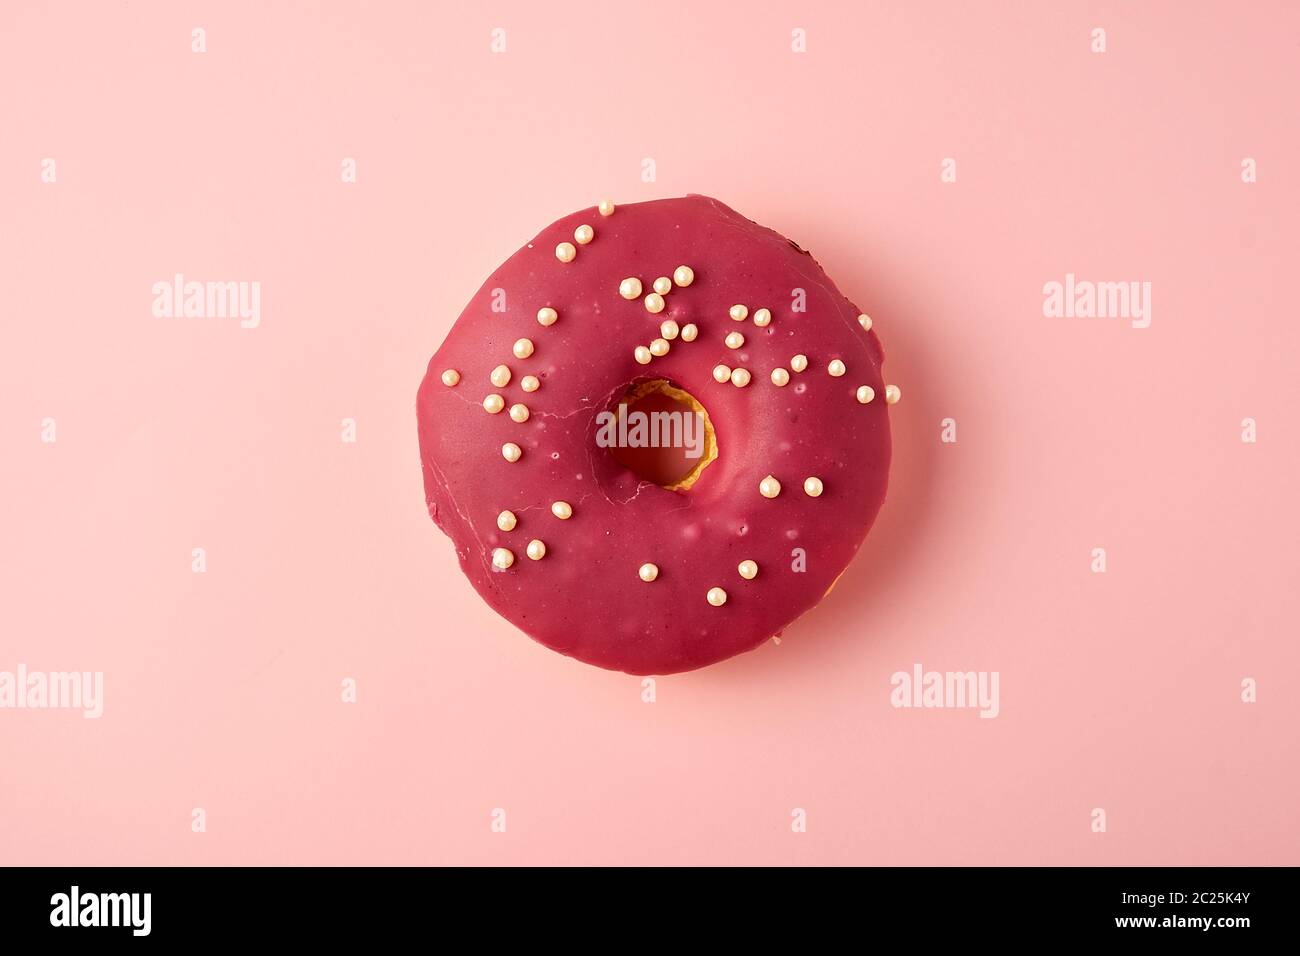 red round donut with white sprinkles on a pink background, top view Stock Photo